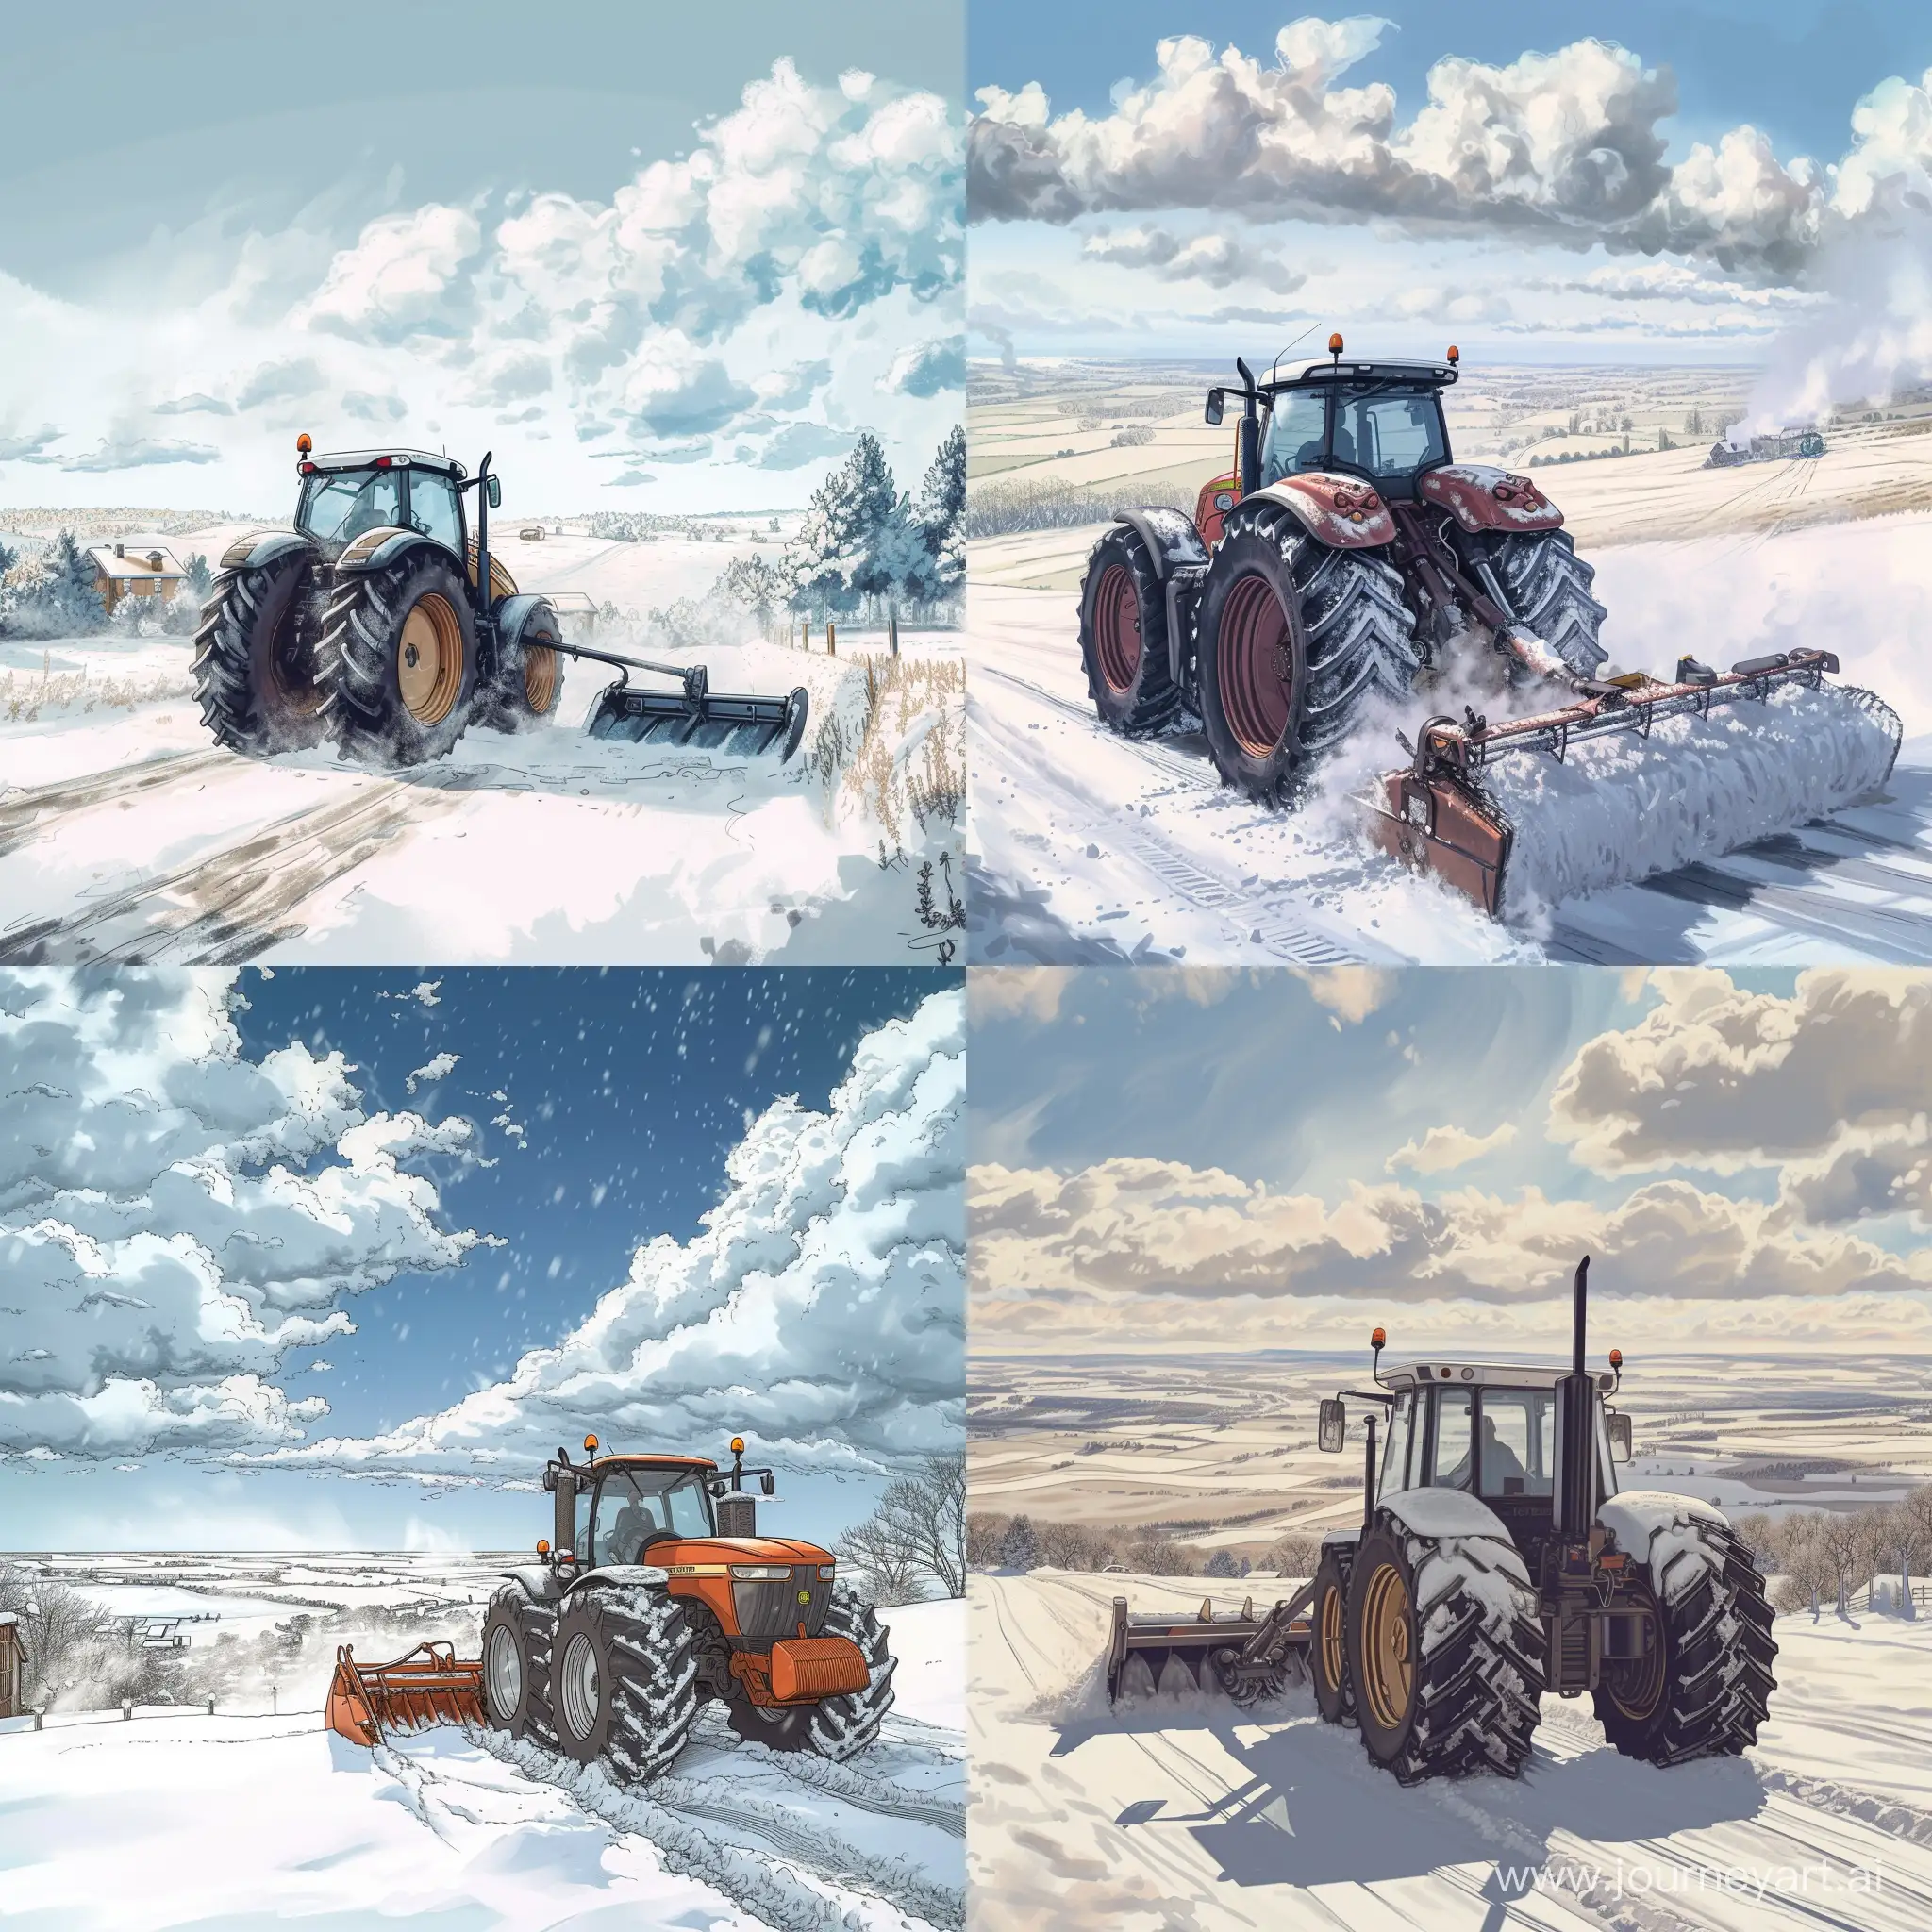 Majestic-SnowClearing-Tractor-A-Cinematic-Landscape